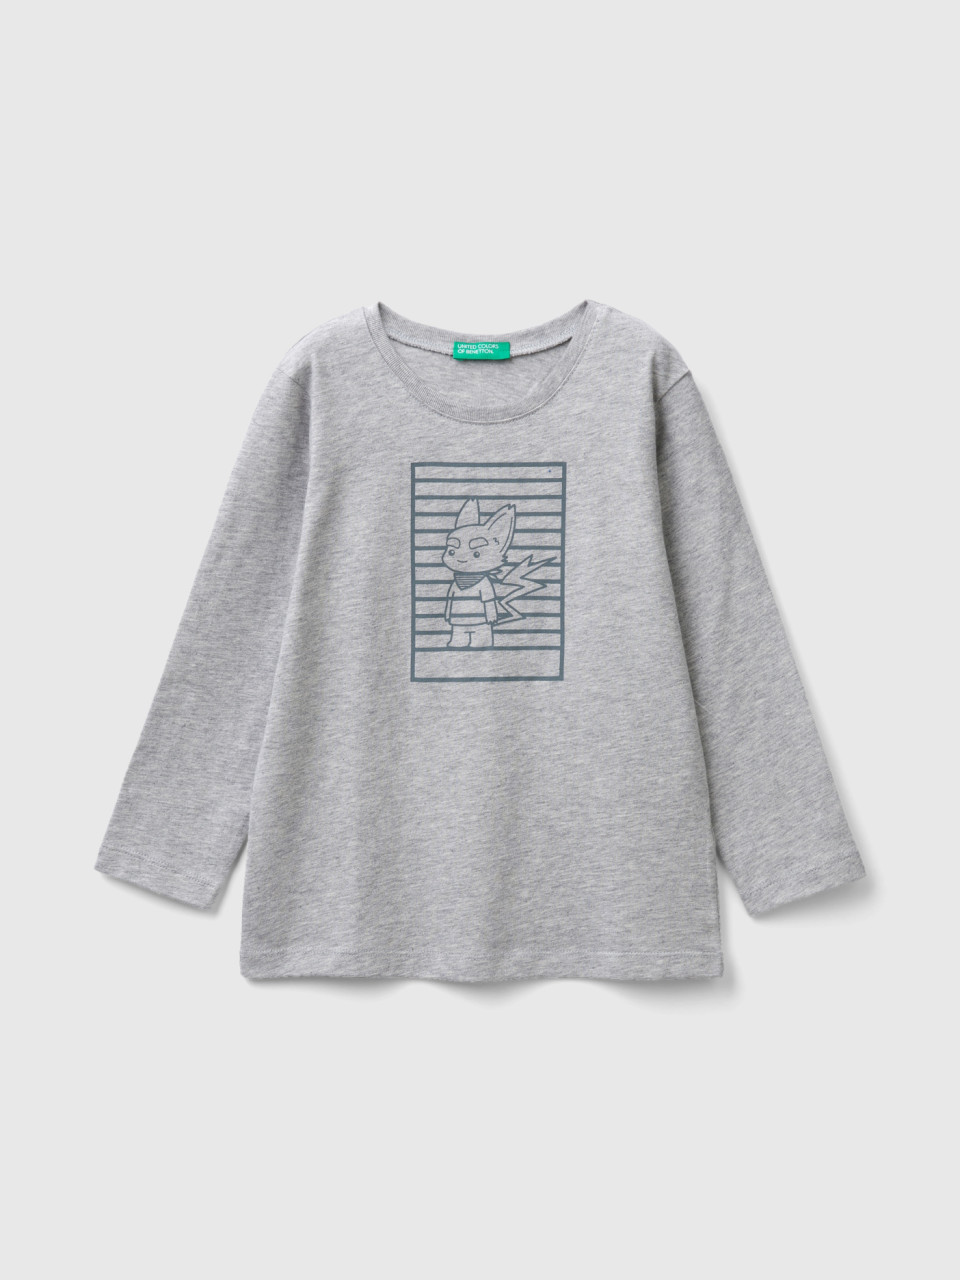 Benetton, Sweater In Cotton With Print, Light Gray, Kids